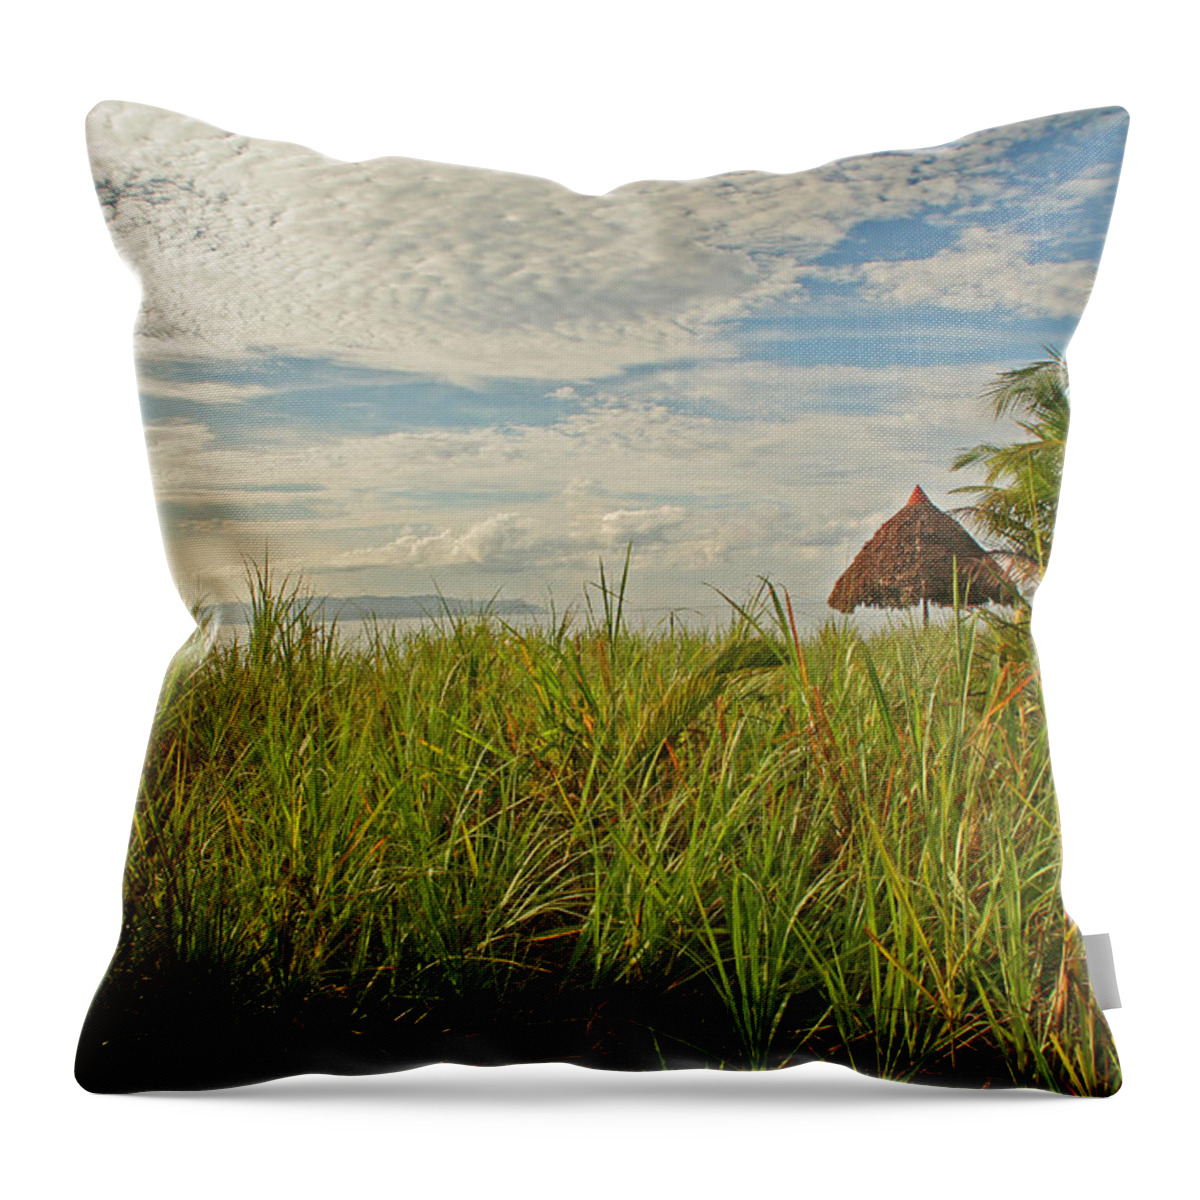 Costa Rica Throw Pillow featuring the photograph Tropical Beach Landscape by Peggy Collins